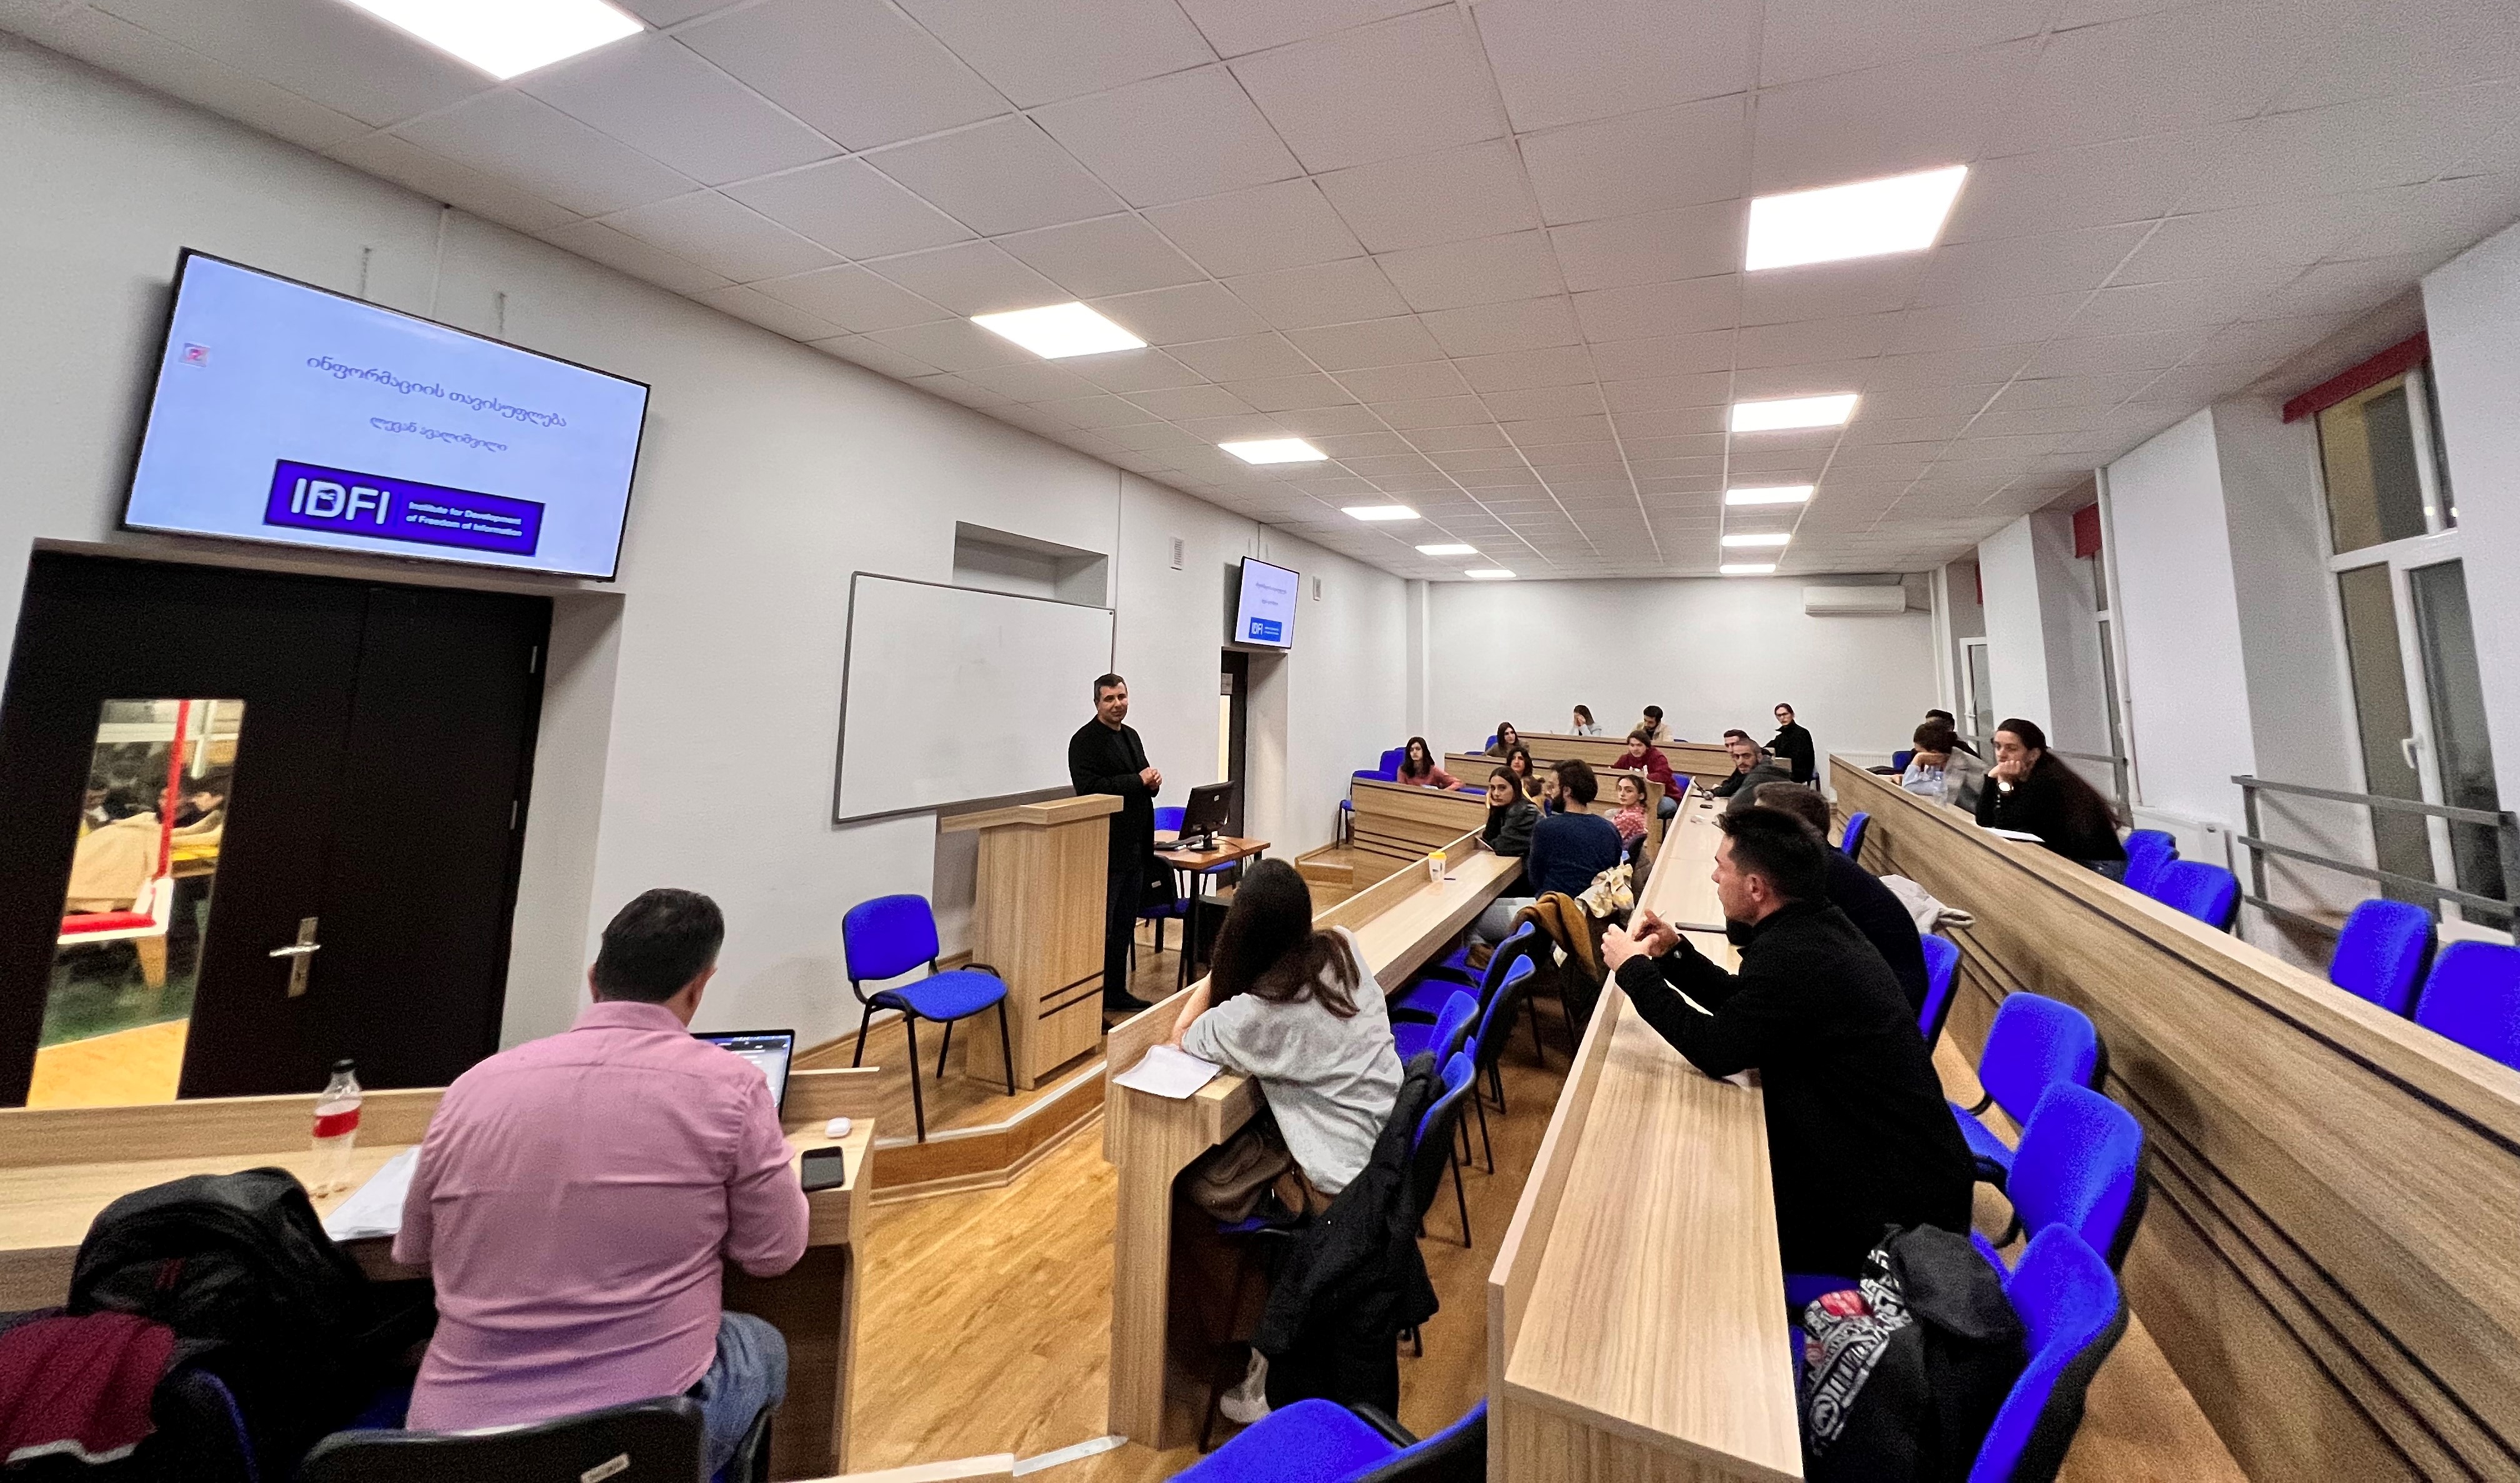 The Programs Director of the Institute for the Development of Freedom of Information (IDFI) conducted an open lecture on Freedom of Information